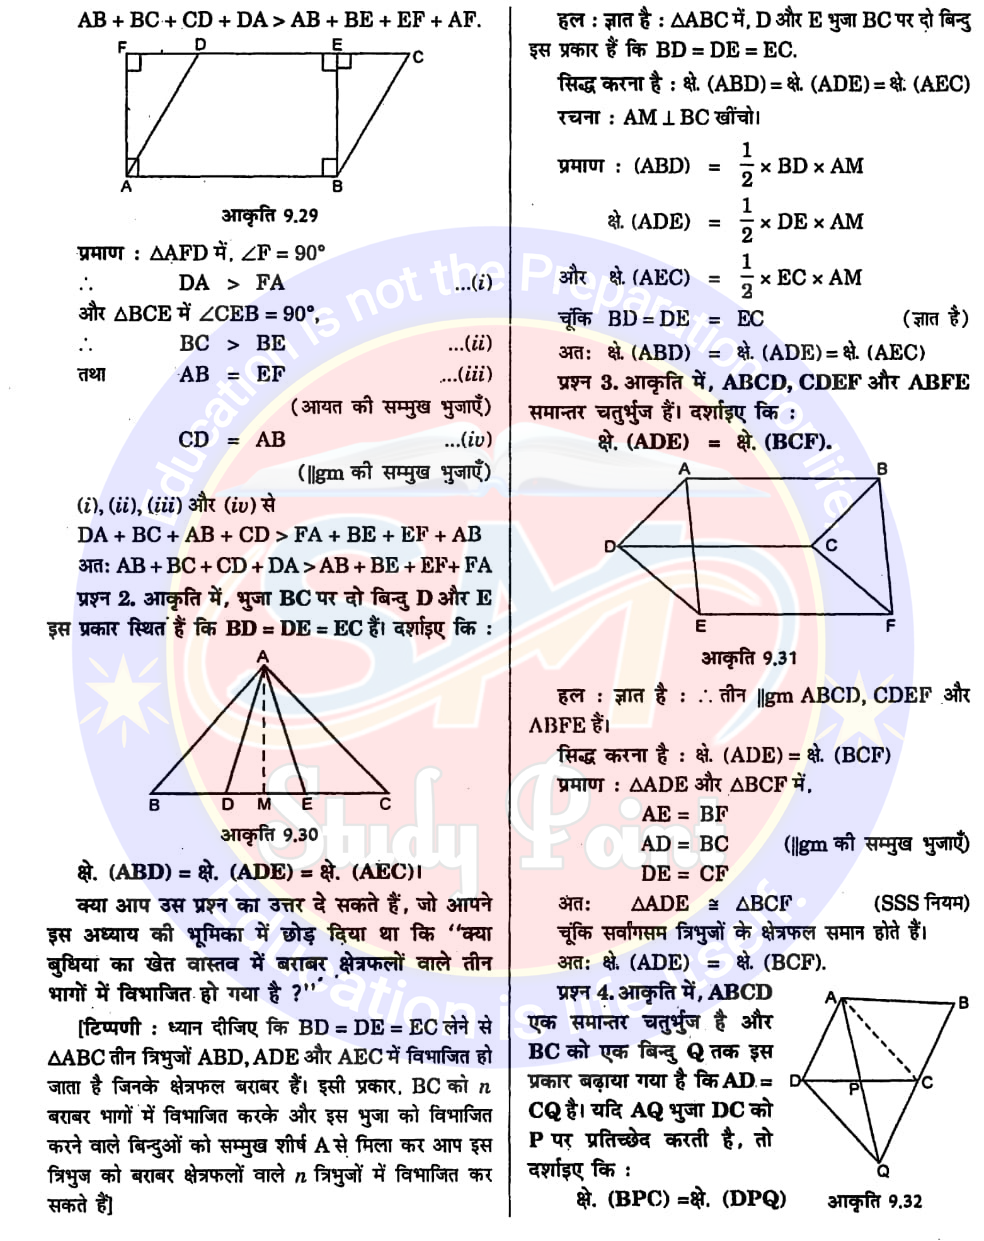 Bihar Board NCERT Math Solution of Areas of parallelograms and triangles | Class 9th Math Chapter 9 | समान्तर चतुर्भुजों और त्रिभुजों के क्षेत्रफल सभी प्रश्नों के उत्तर | प्रश्नावली  7.1, 7.2, 7.3, 7.4, 7.5 | SM Study Point